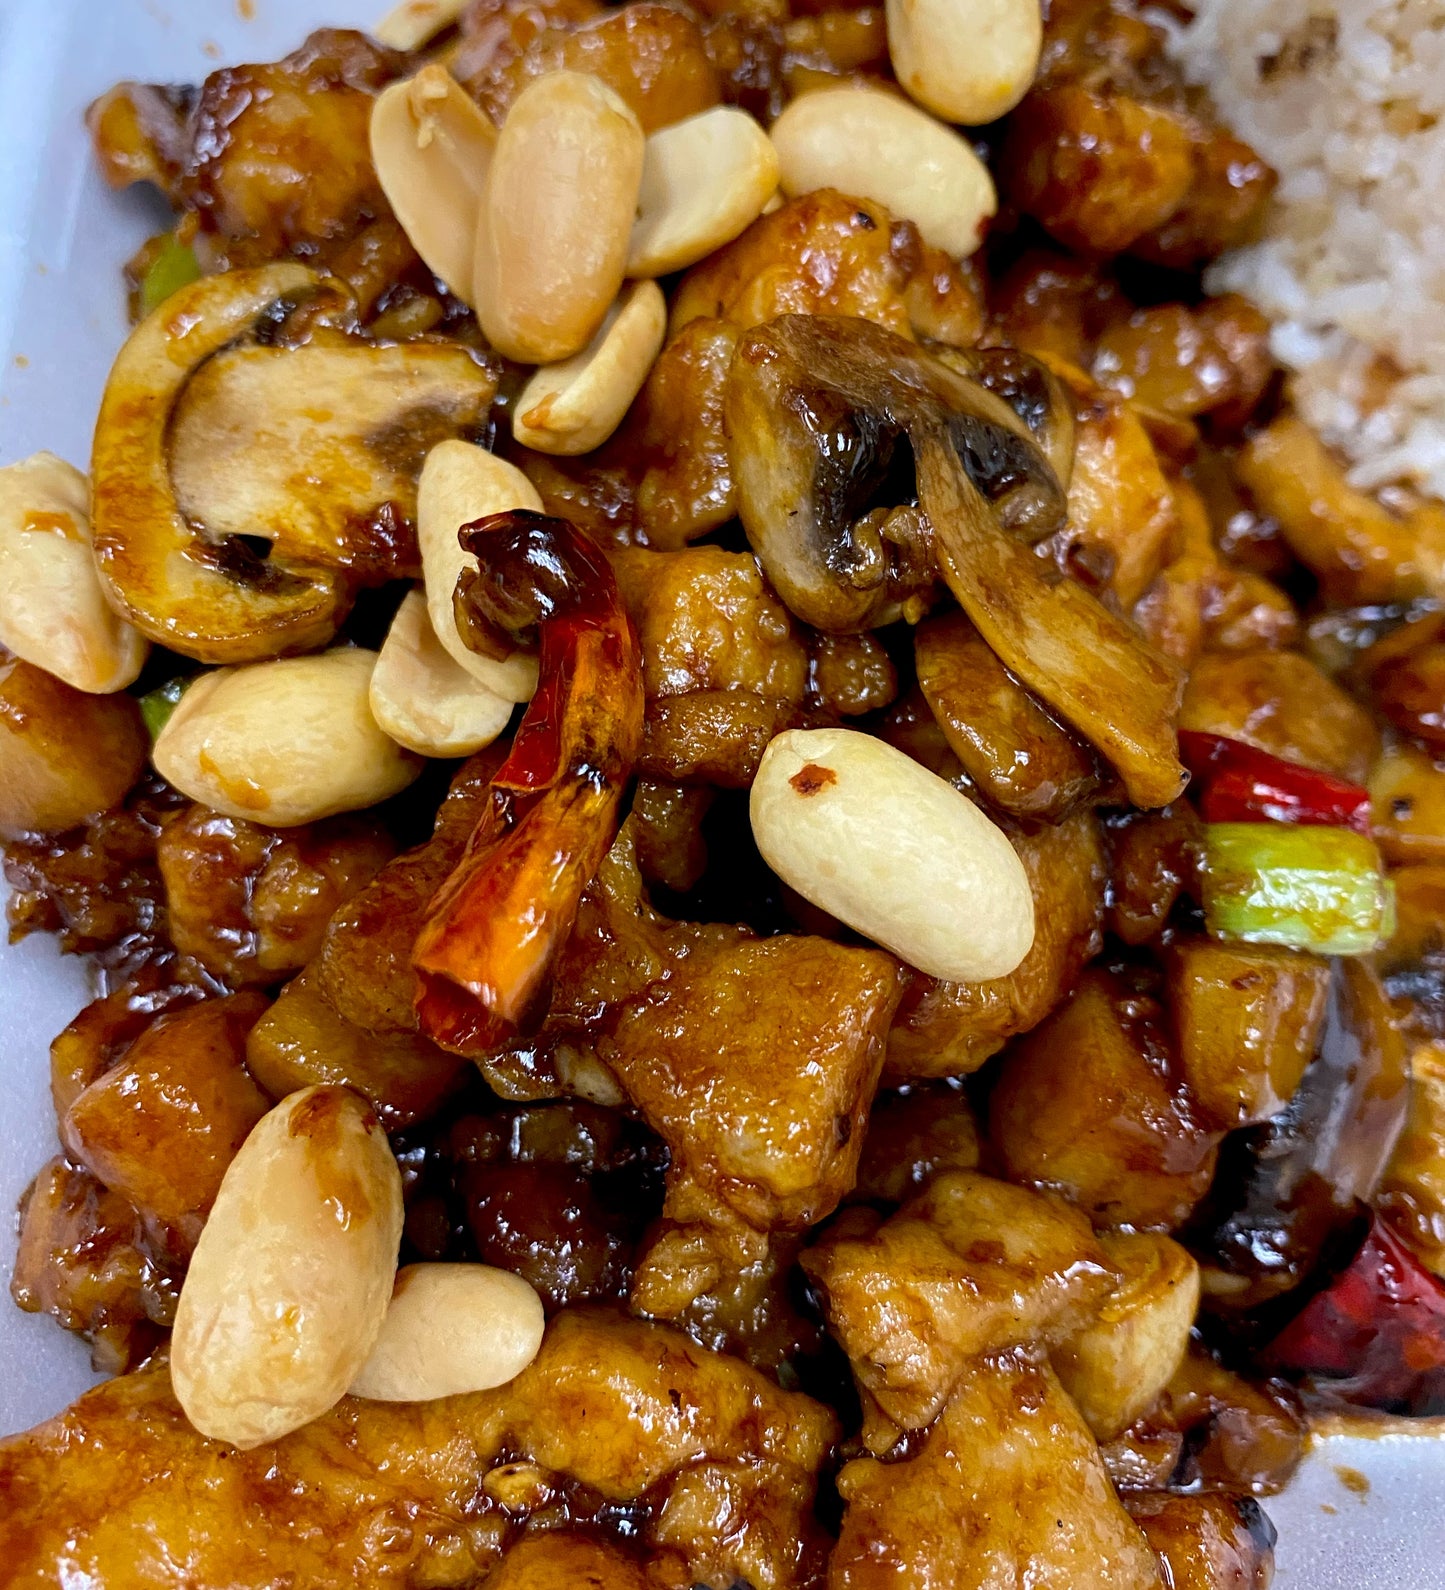 Lunch - Kung Pao Chicken*